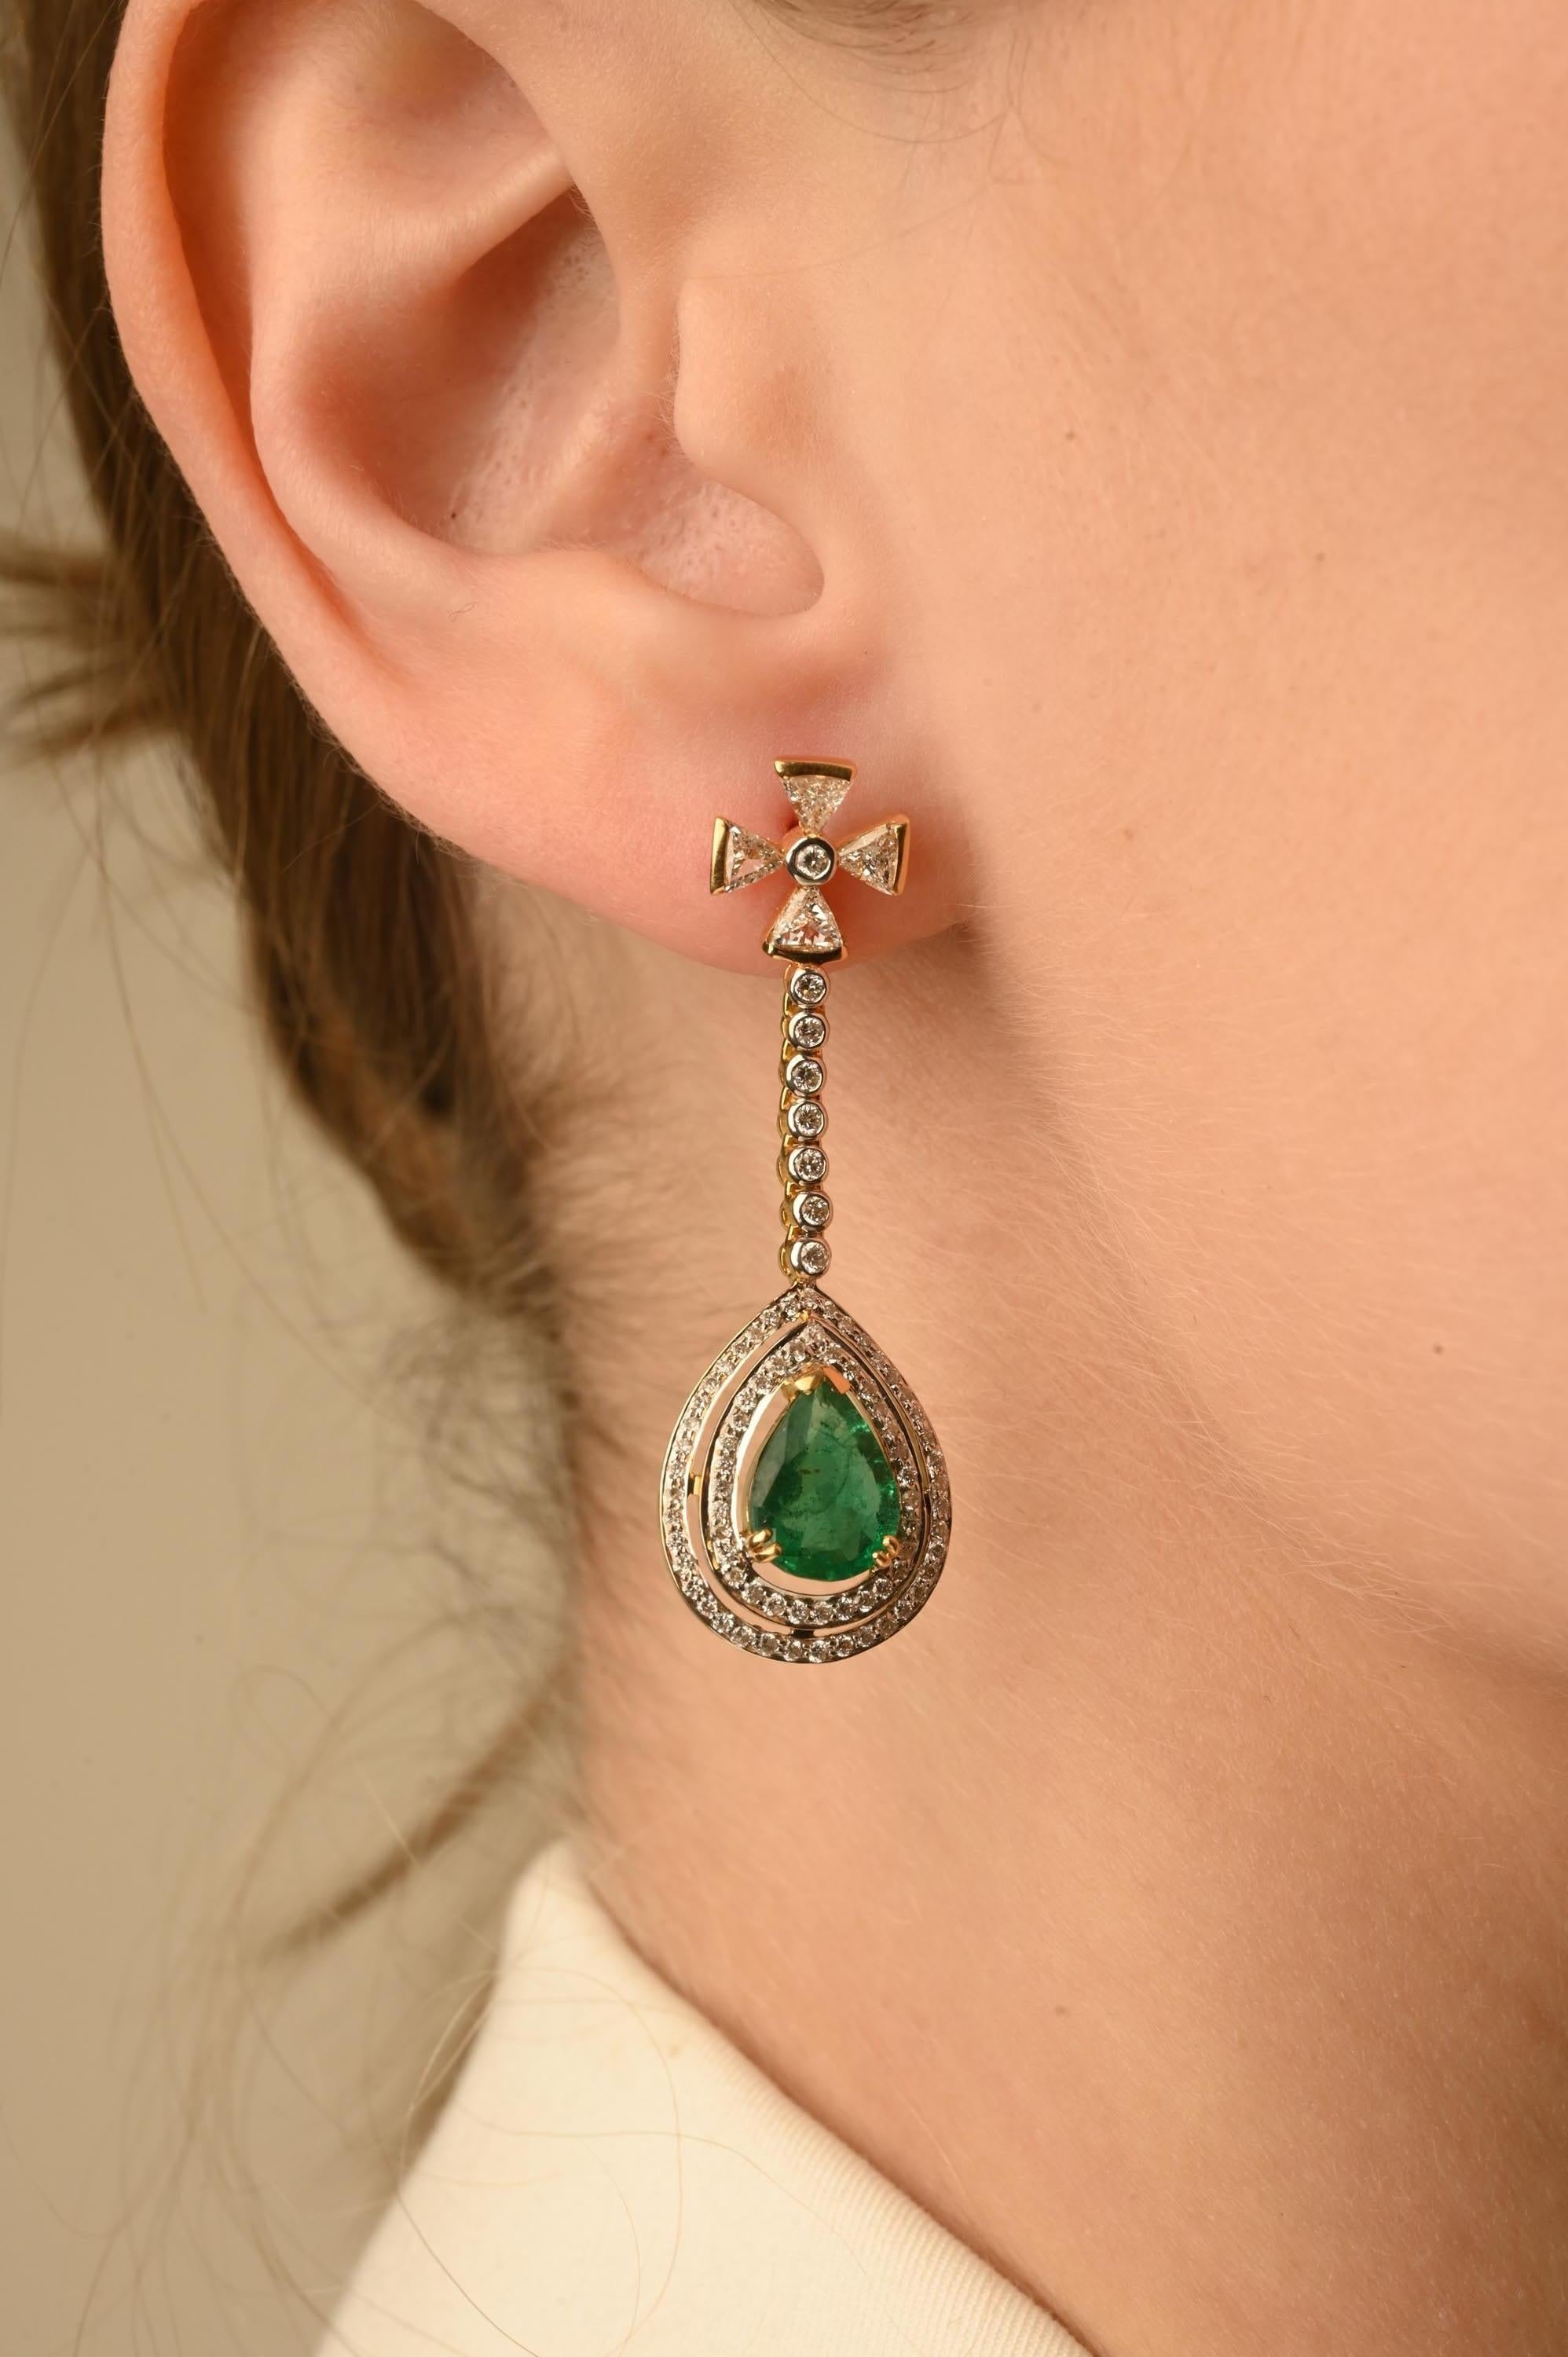 Emerald Dangle Drop Earrings in 14K Gold with Diamonds to make a statement with your look. These earrings create a sparkling, luxurious look featuring pear cut gemstone.
Emerald enhances the intellectual capacity. 
Designed with pear cut emerald